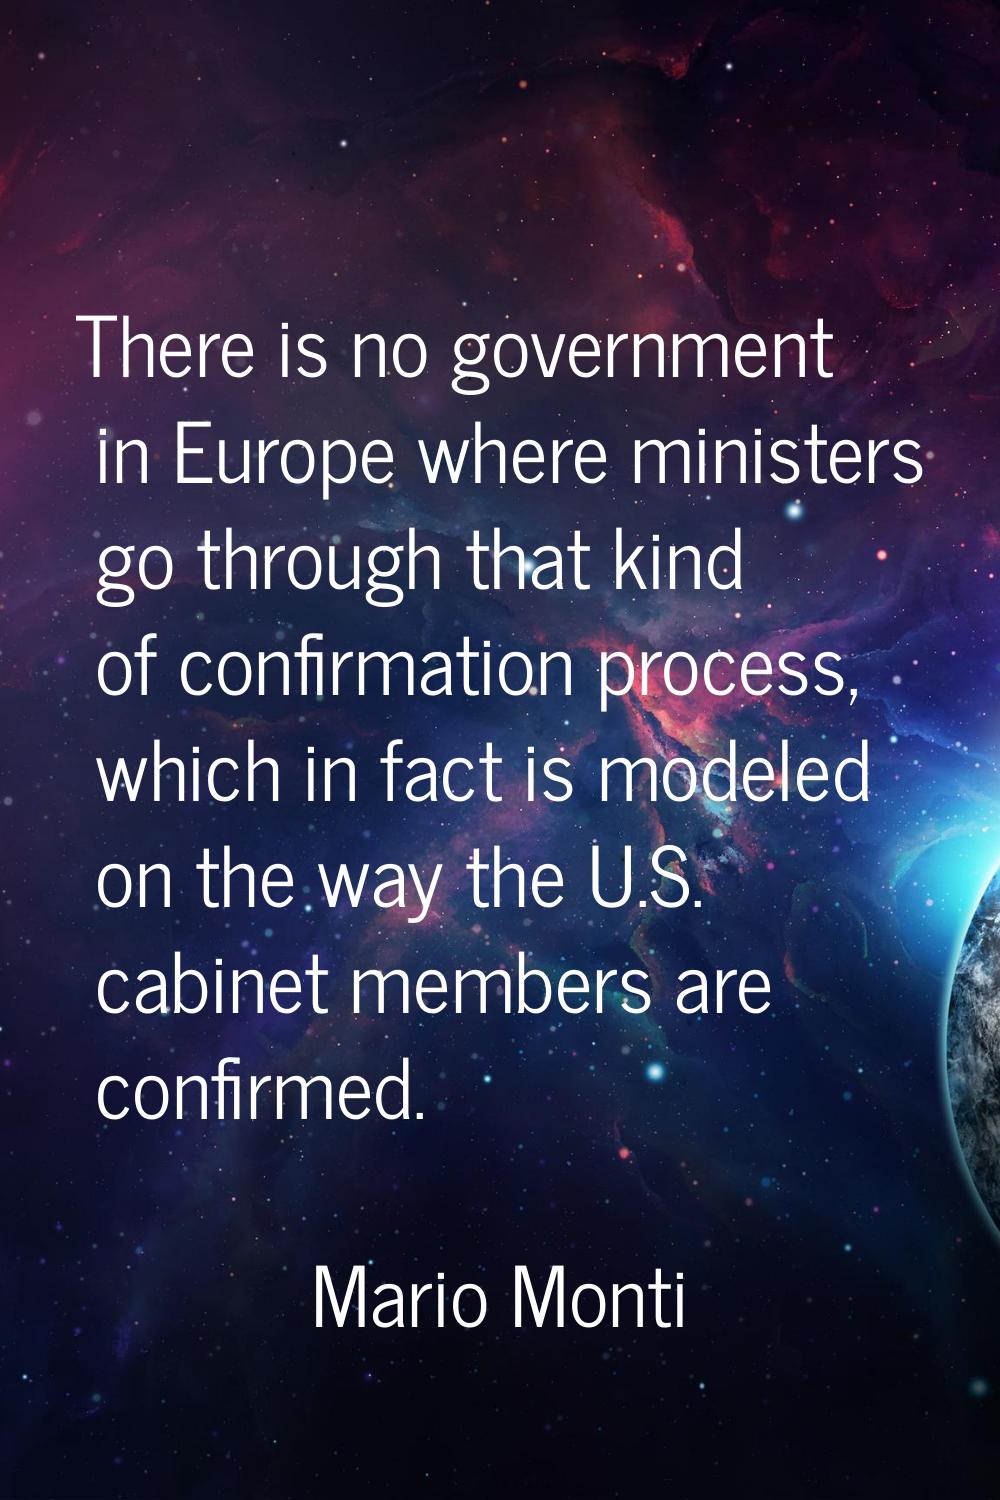 There is no government in Europe where ministers go through that kind of confirmation process, whic